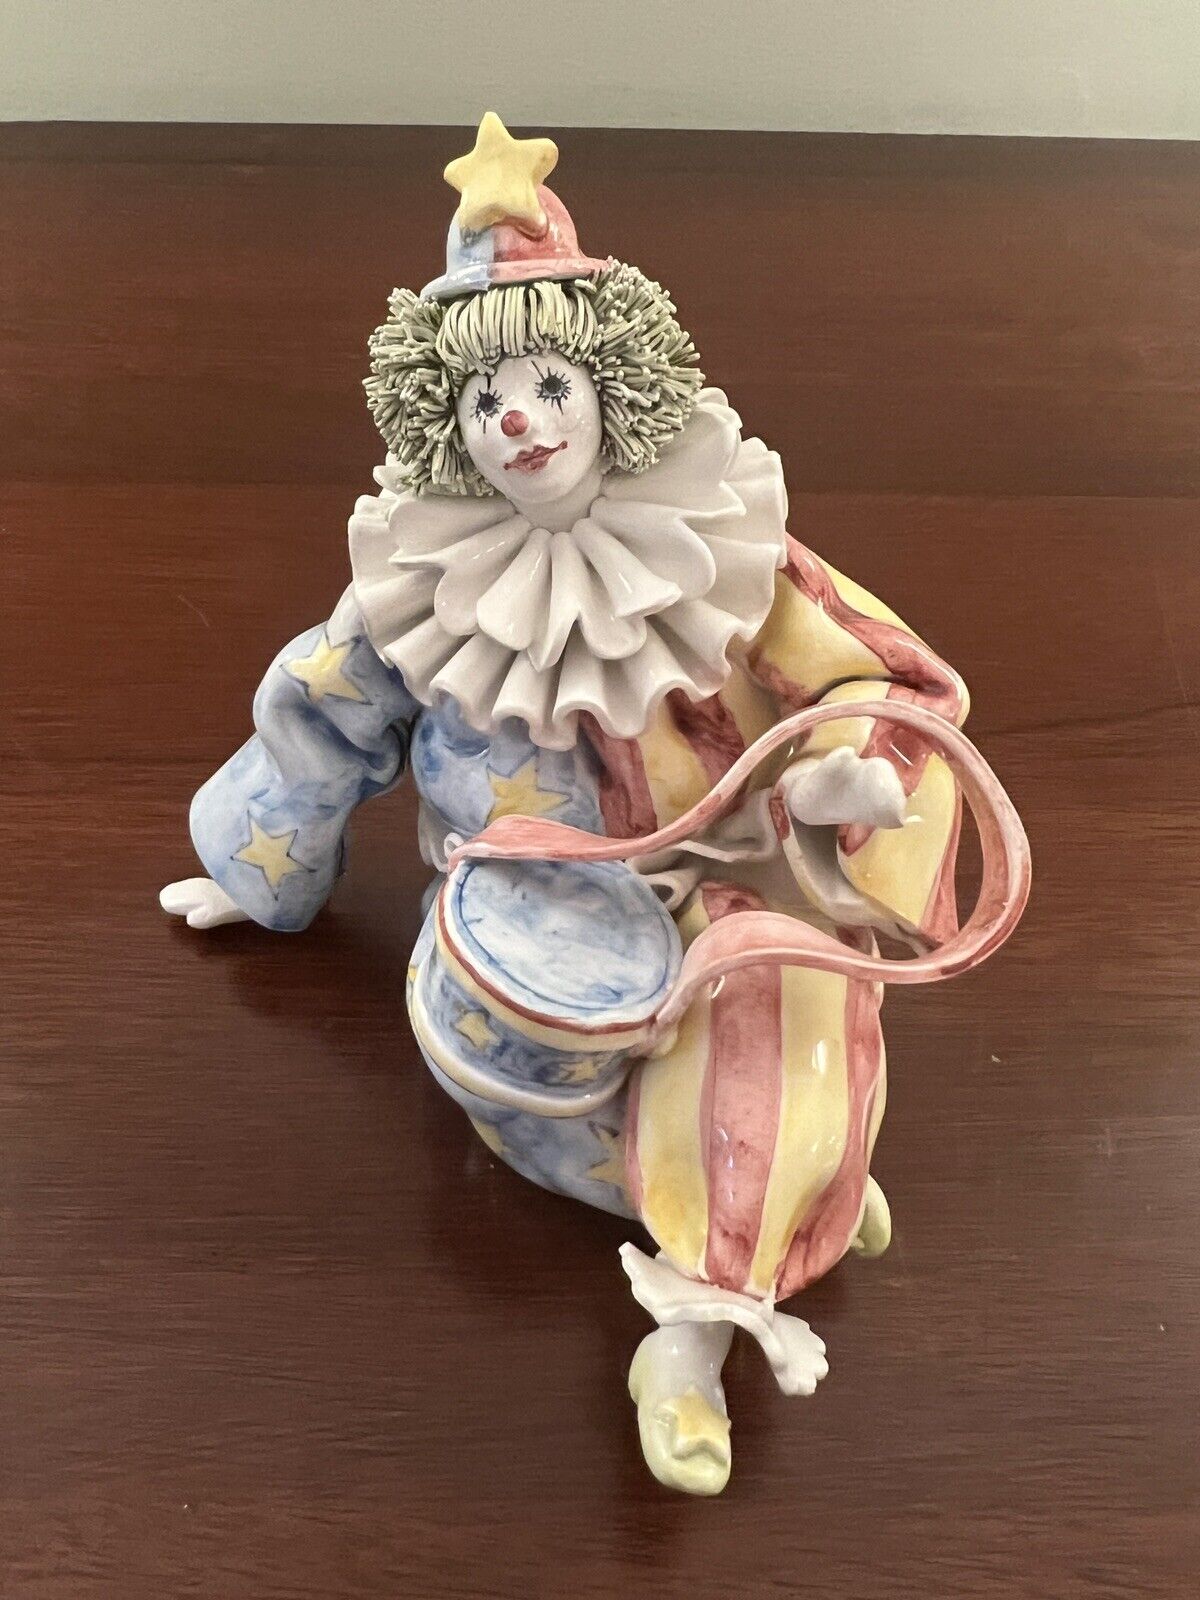 🔥 VERY RARE Vintage Pierrot Clown Made in Italy for Gumps San Francisco